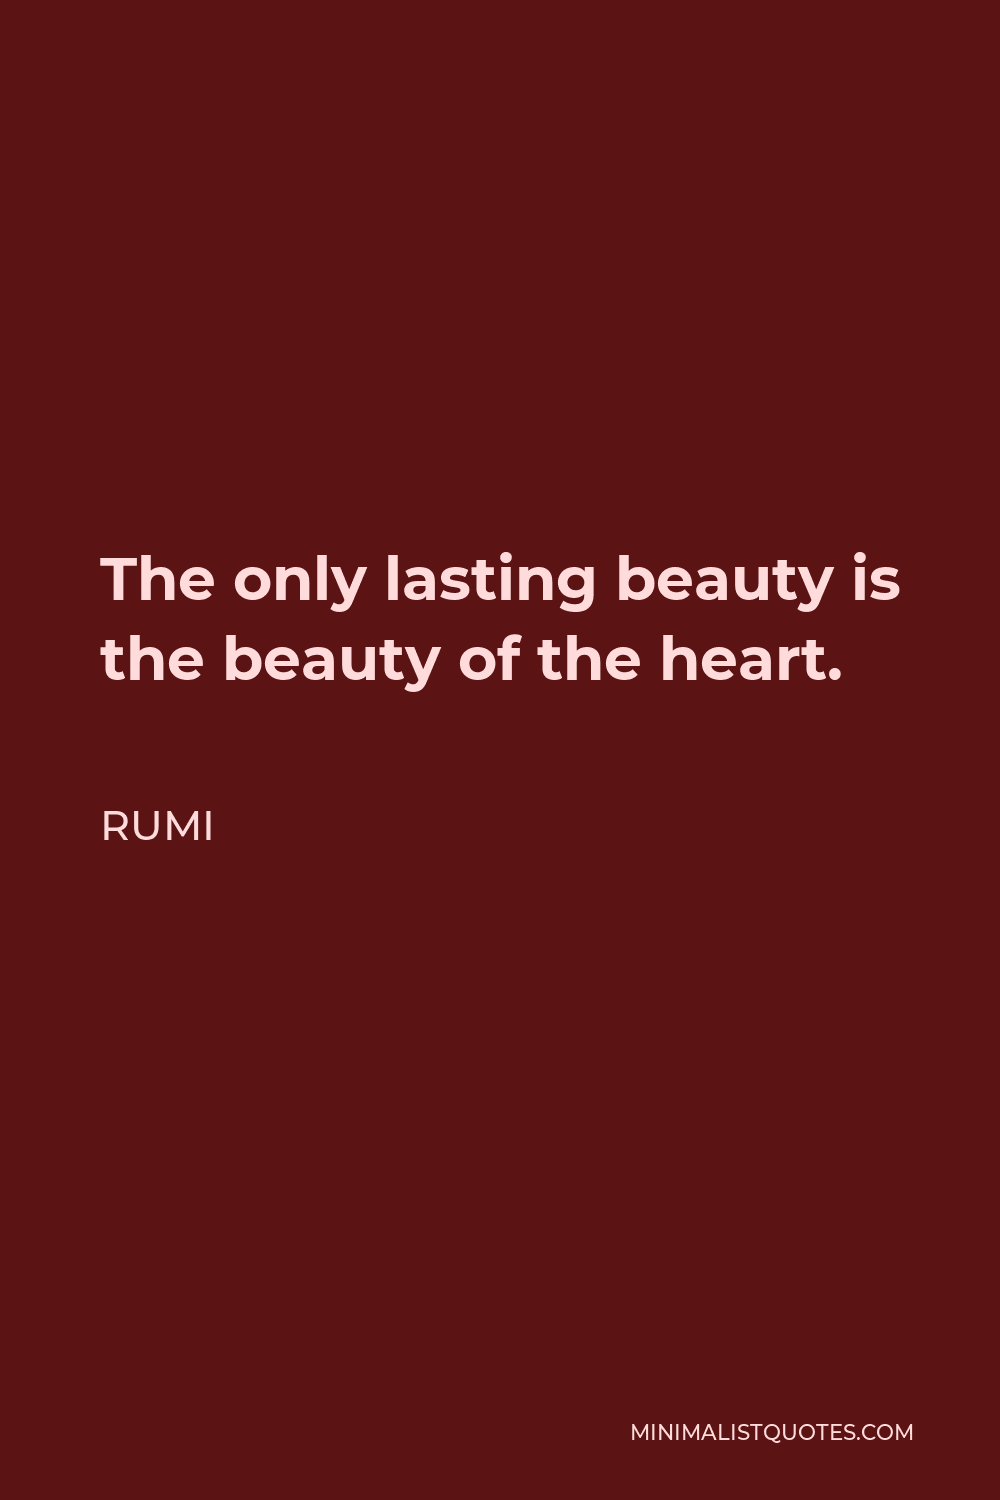 Rumi Quote - The only lasting beauty is the beauty of the heart.